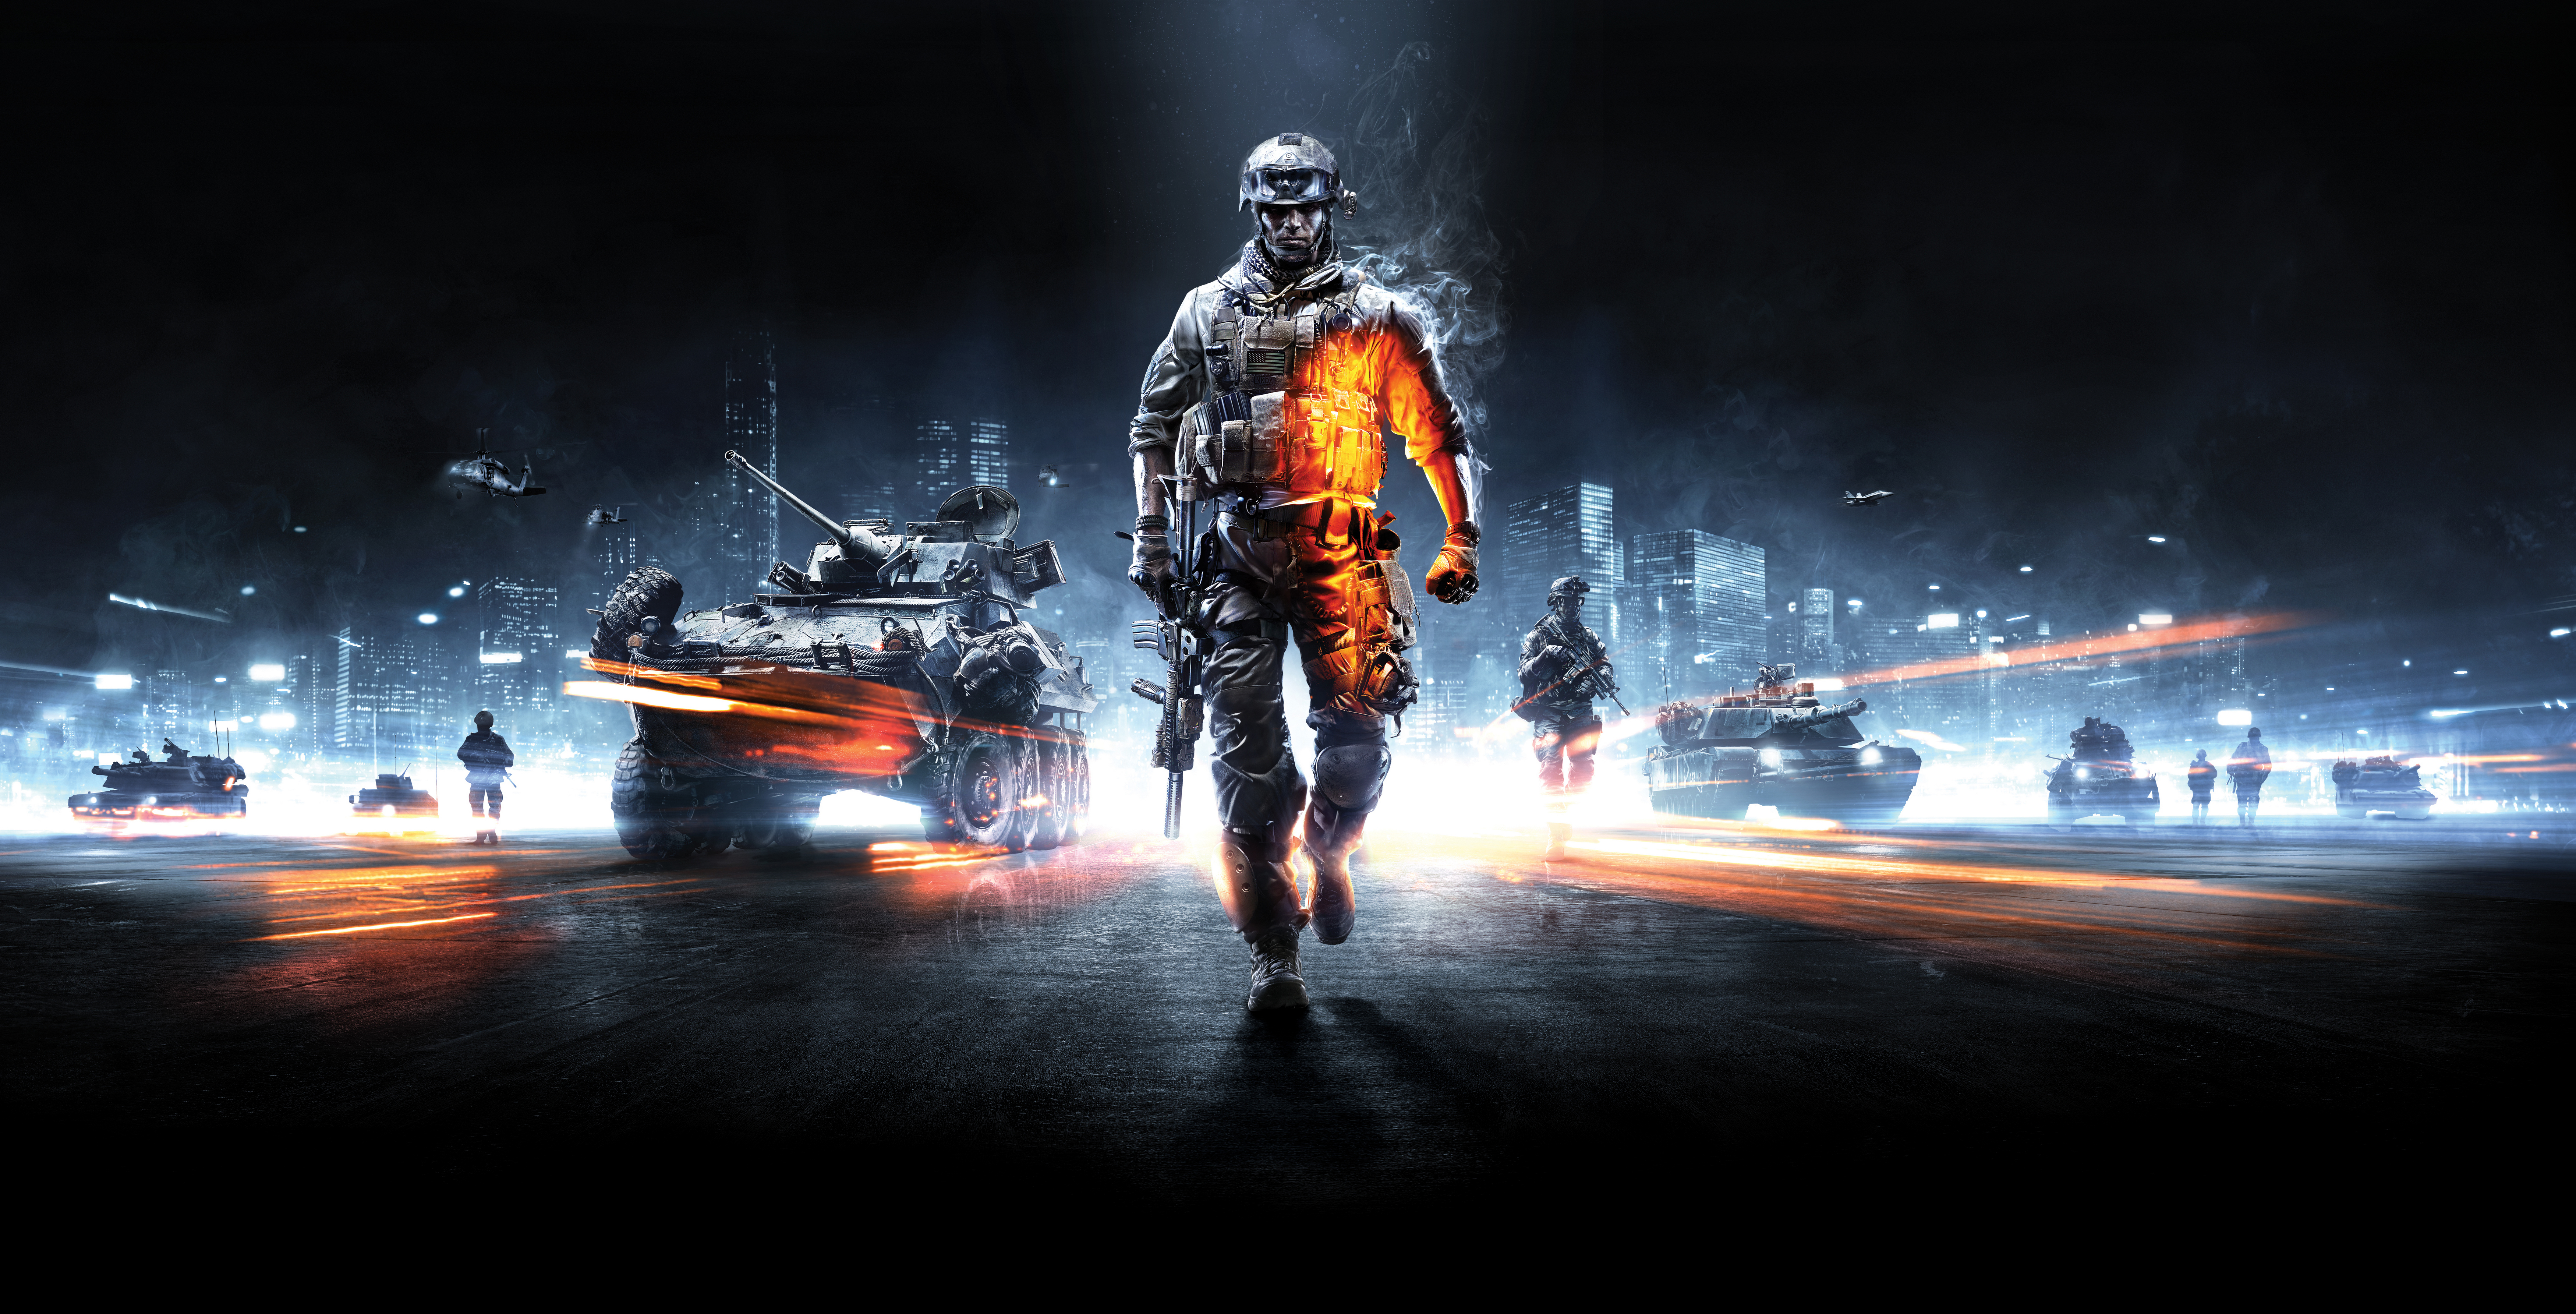 General 7000x3570 Battlefield 3 video games weapon video game men soldier video game art Electronic Arts frontal view gun building vehicle military vehicle wide screen boys with guns